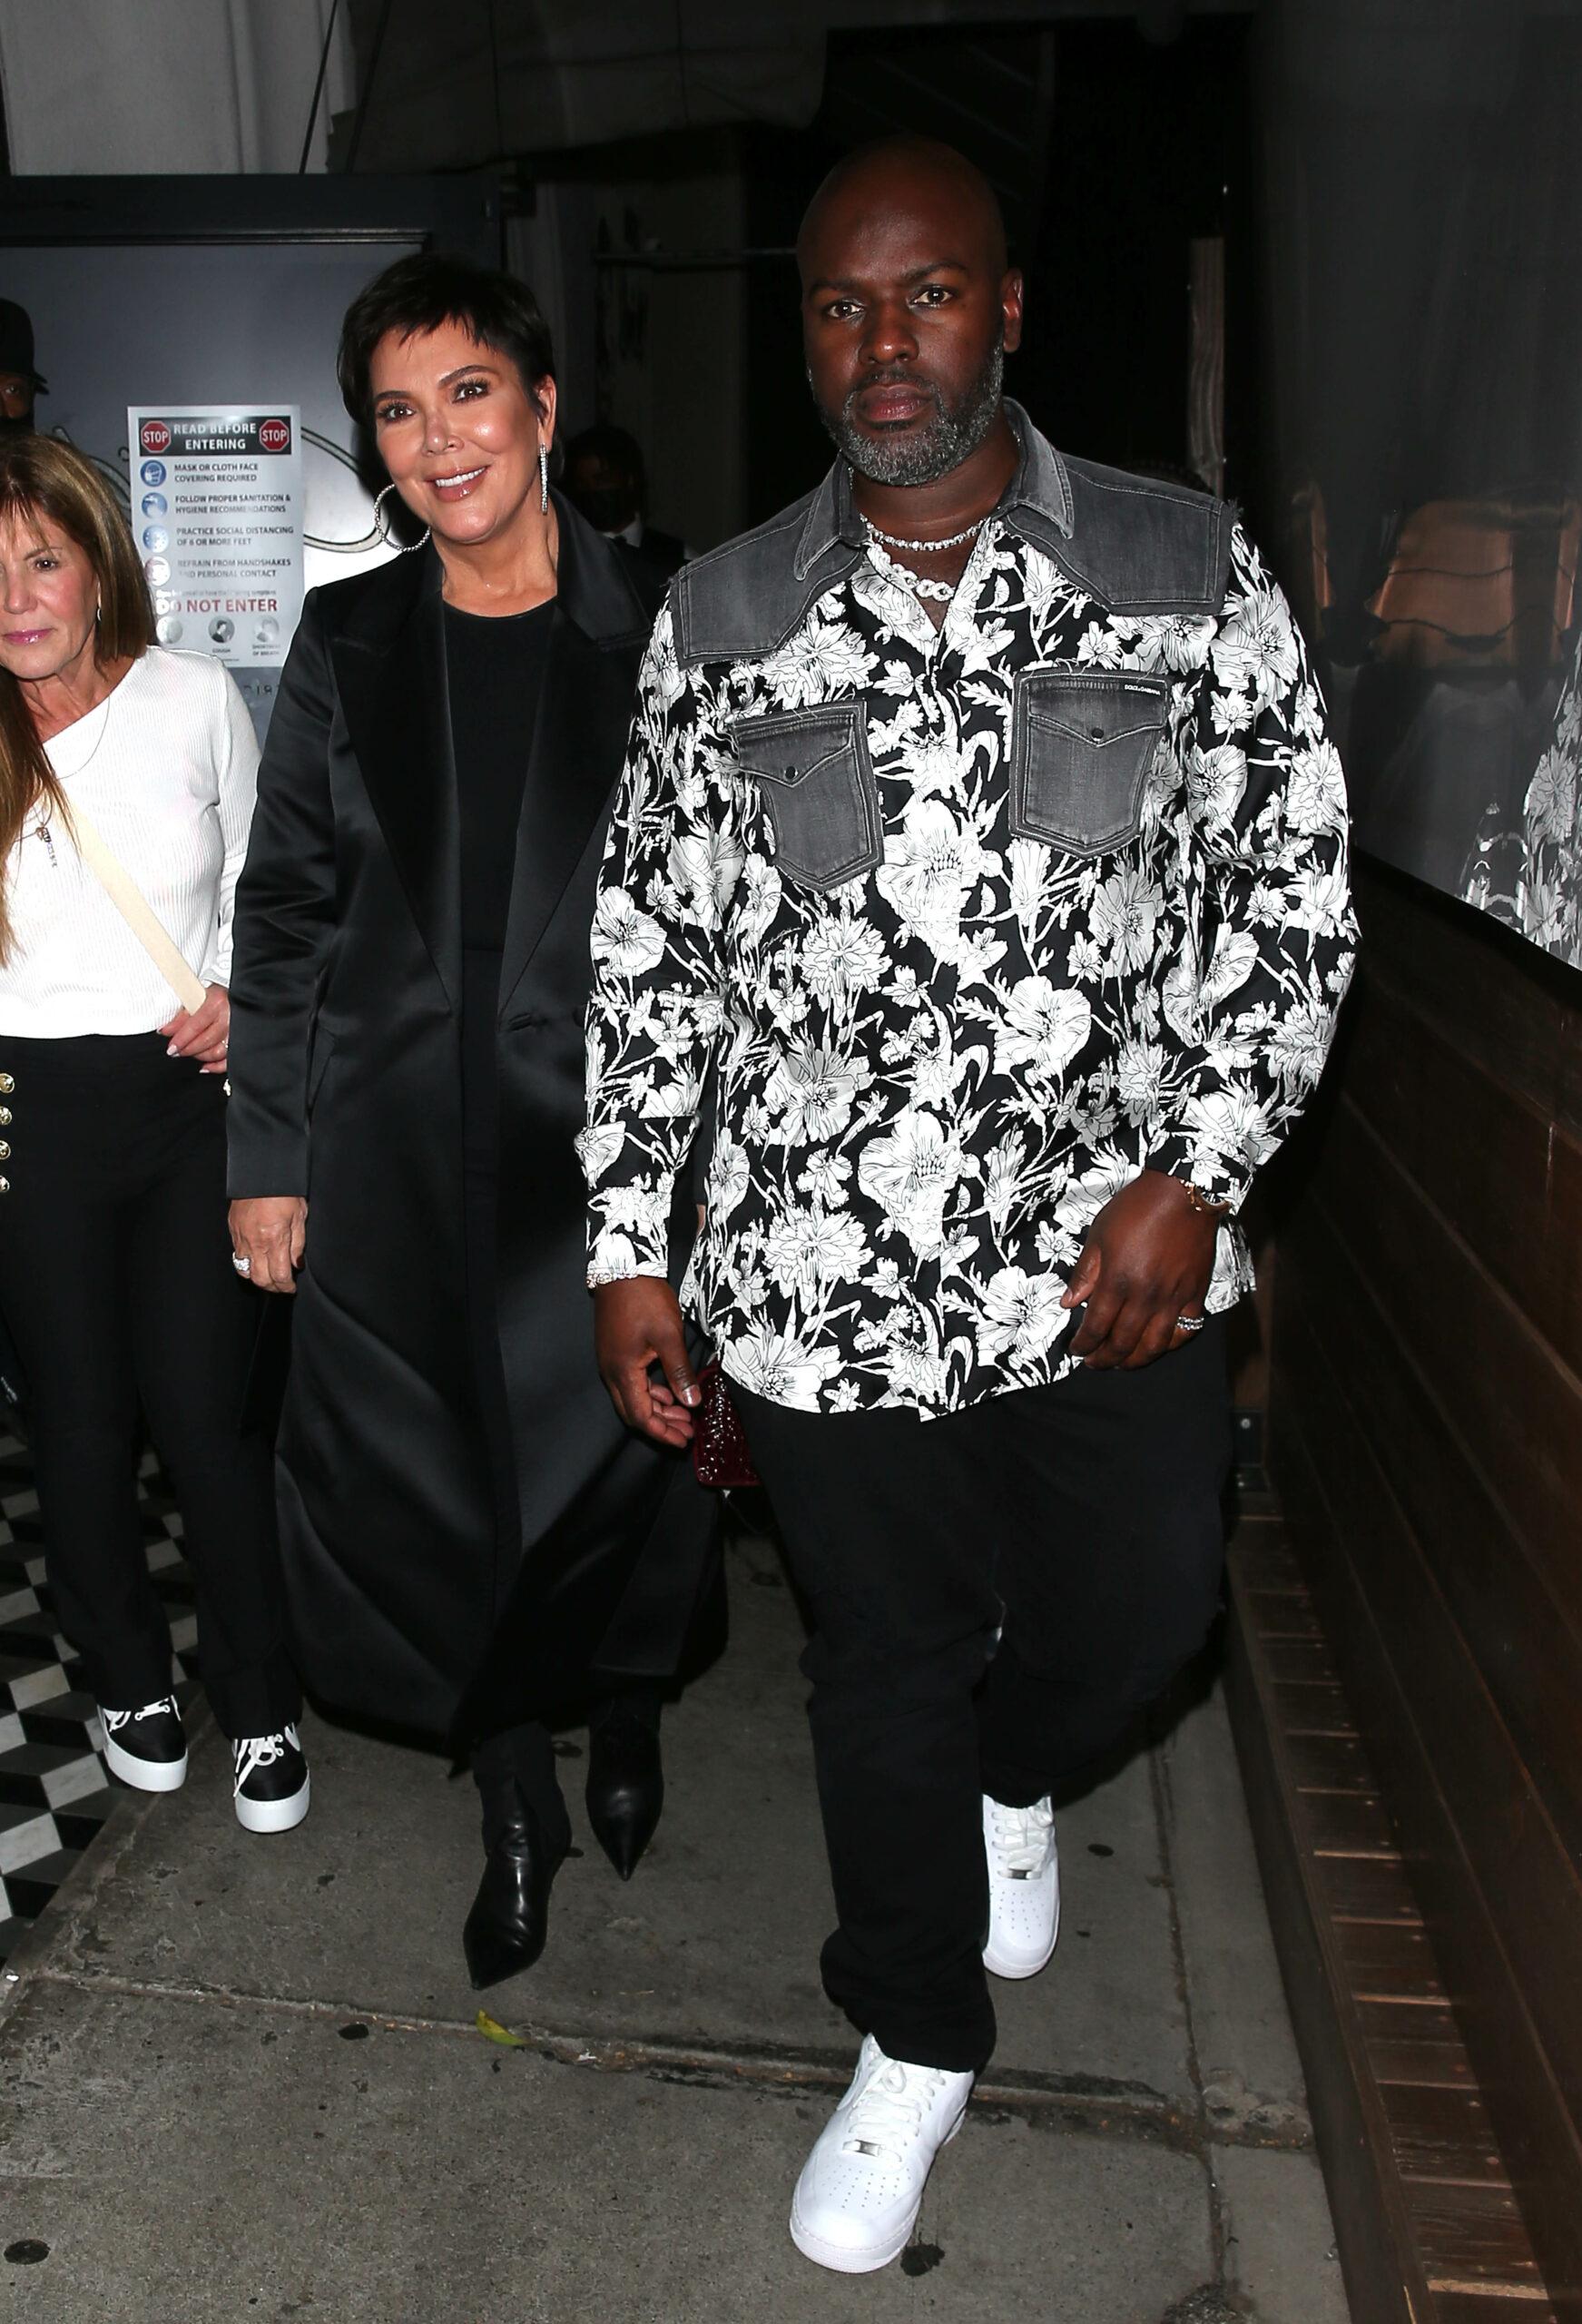 Kris Jenner and Corey Gamble seen leaving dinner at Craigs Restaurant in West Hollywood CA